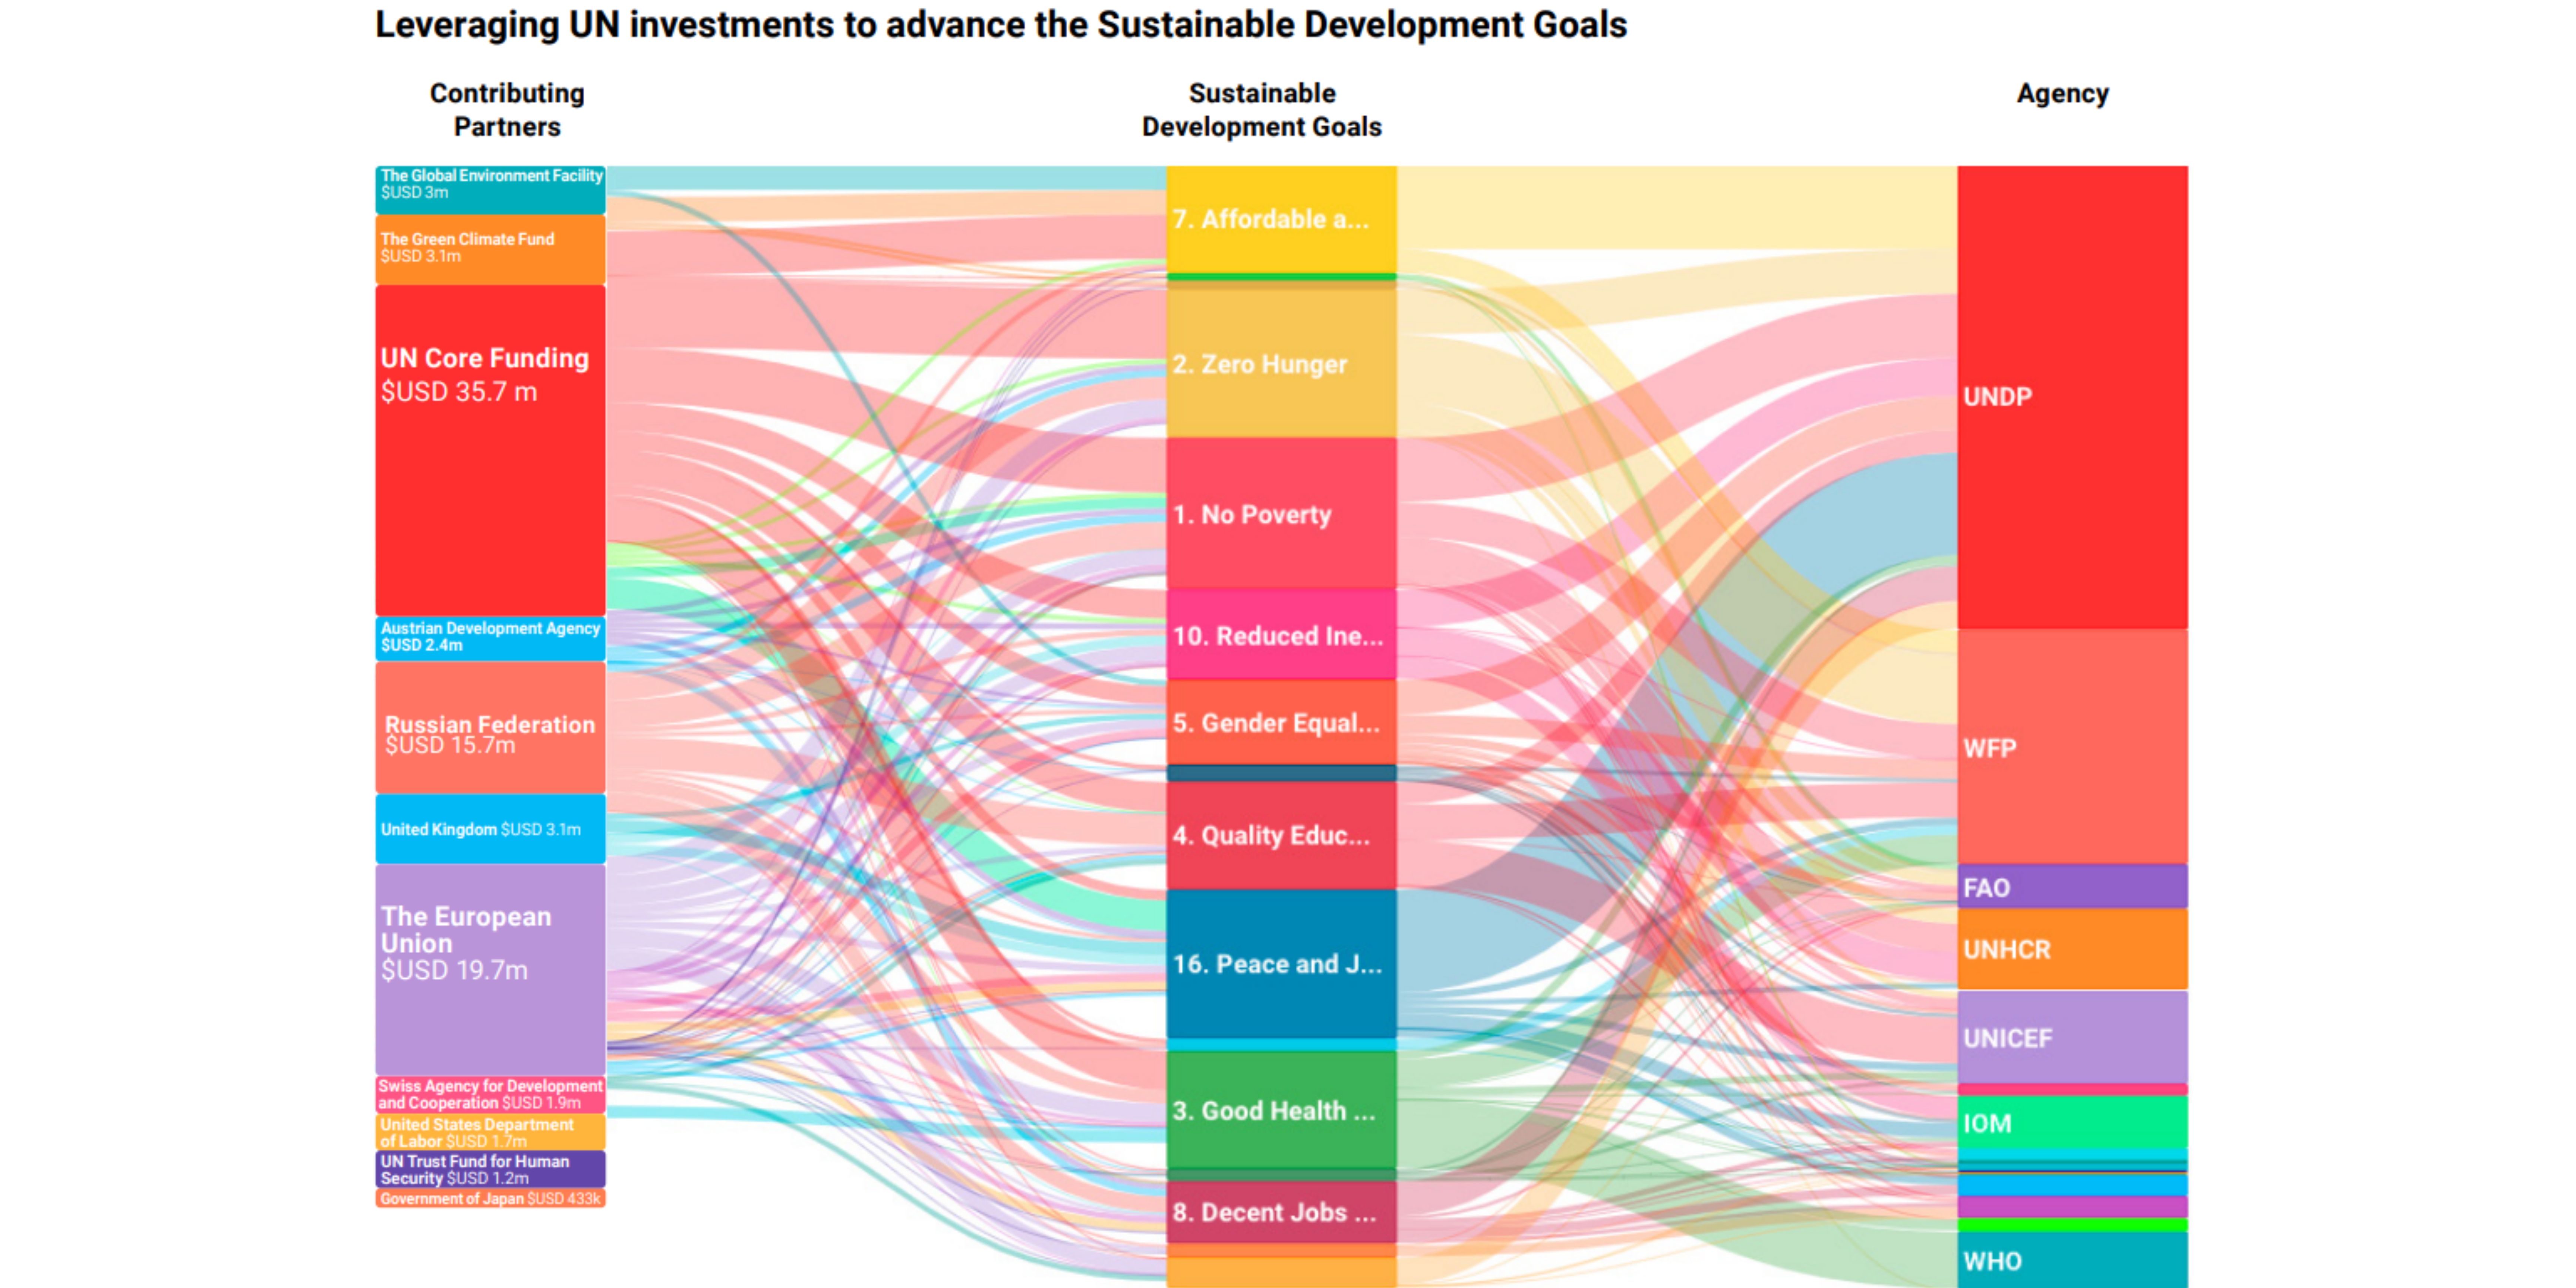 Figure 2. UN INFO Visual 1: Linking Investments, Agencies and SDGs in Armenia